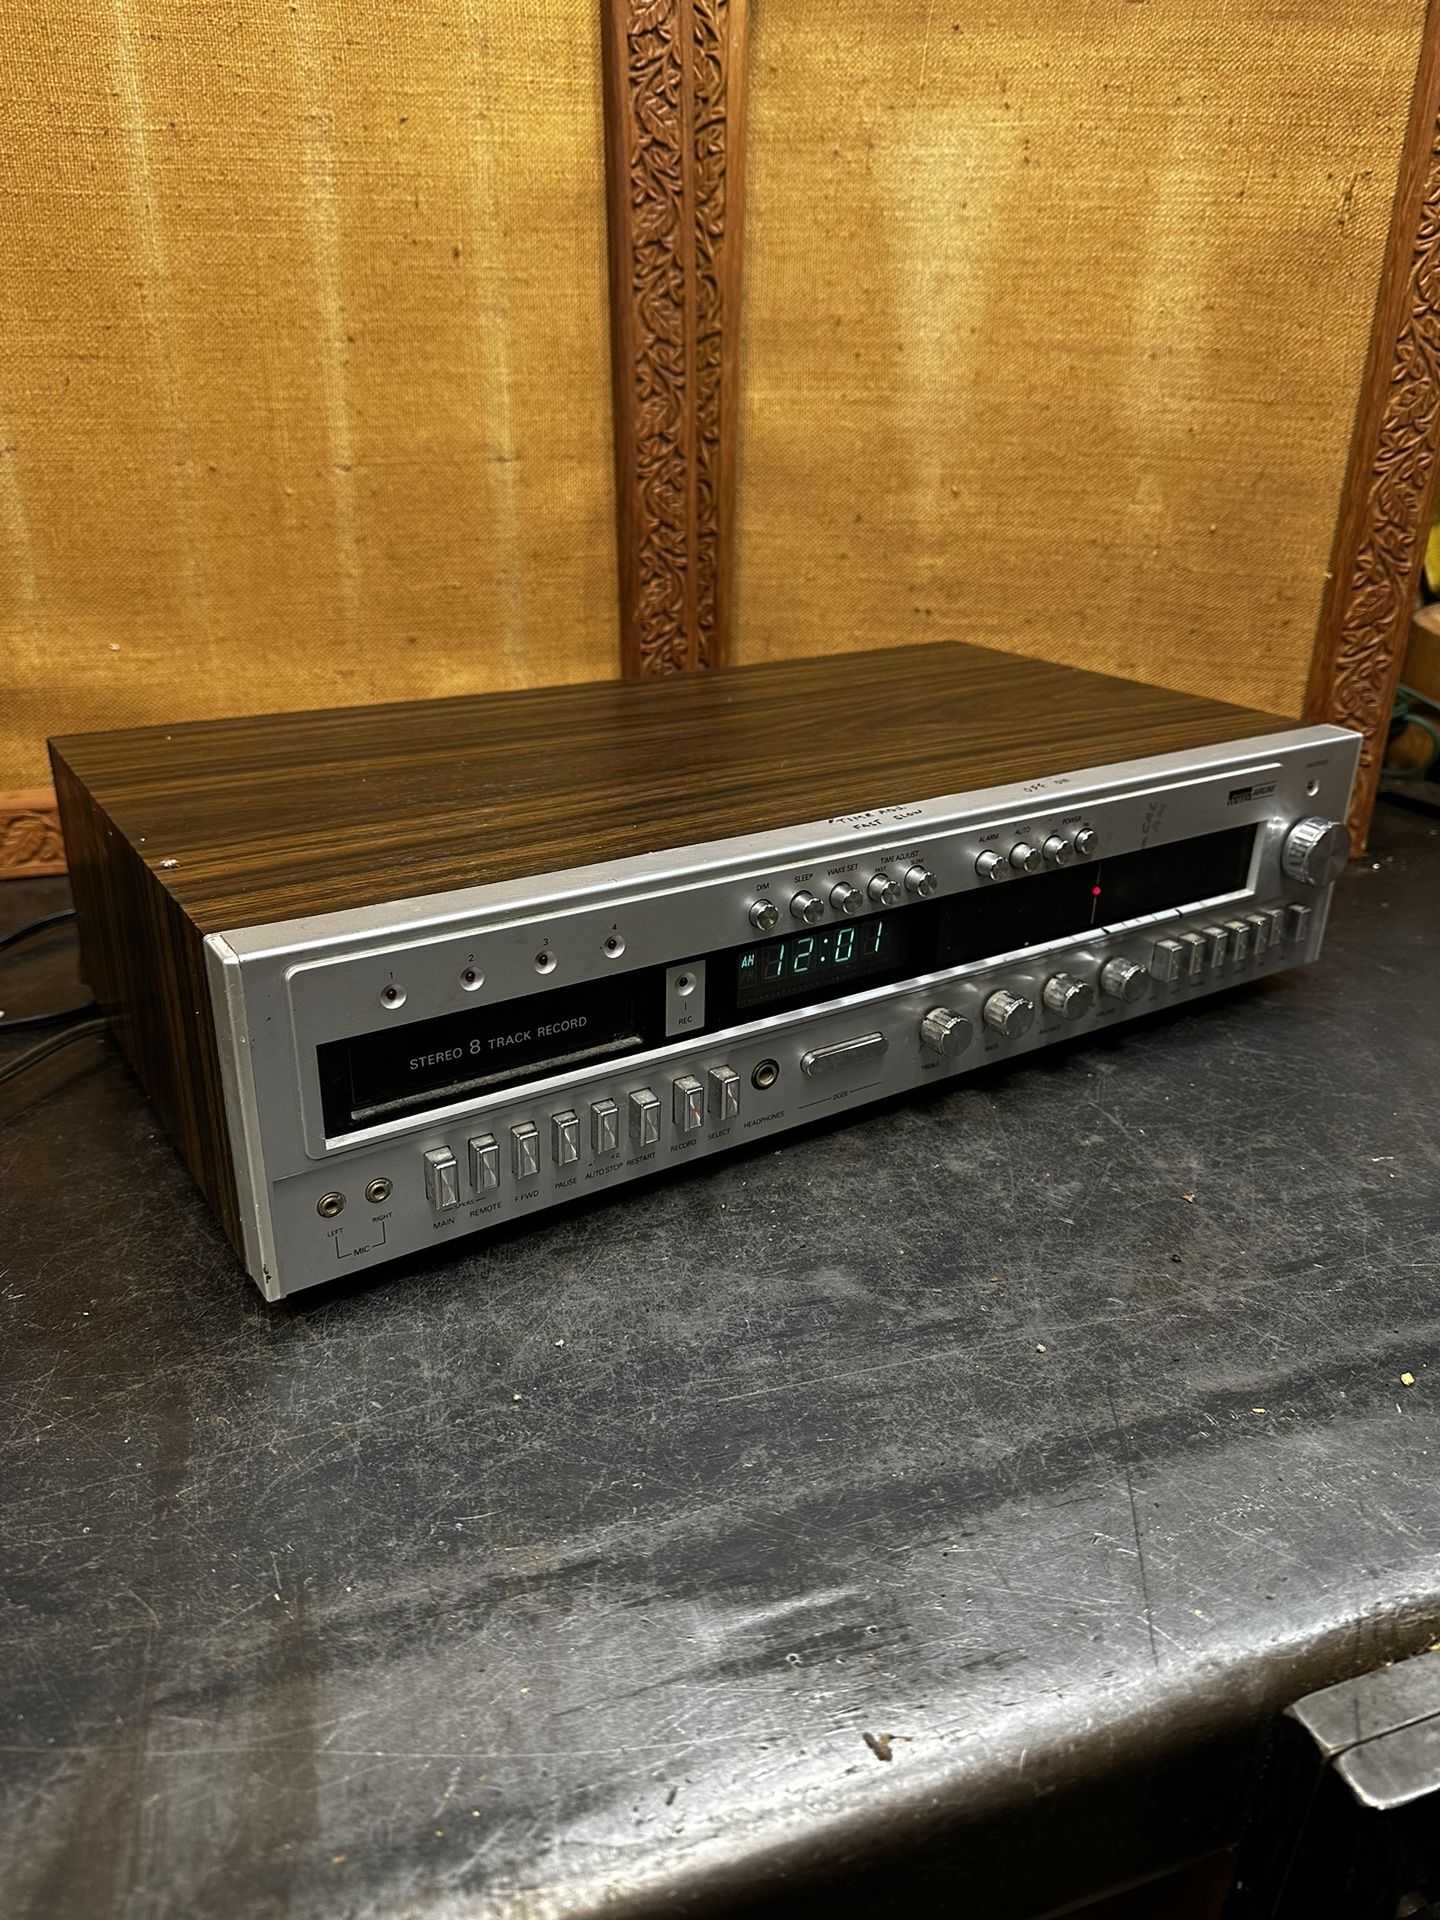 VTG Montgomery Ward Airline Stereo AM FM Receiver 8 Track Player Model GEN 6247A